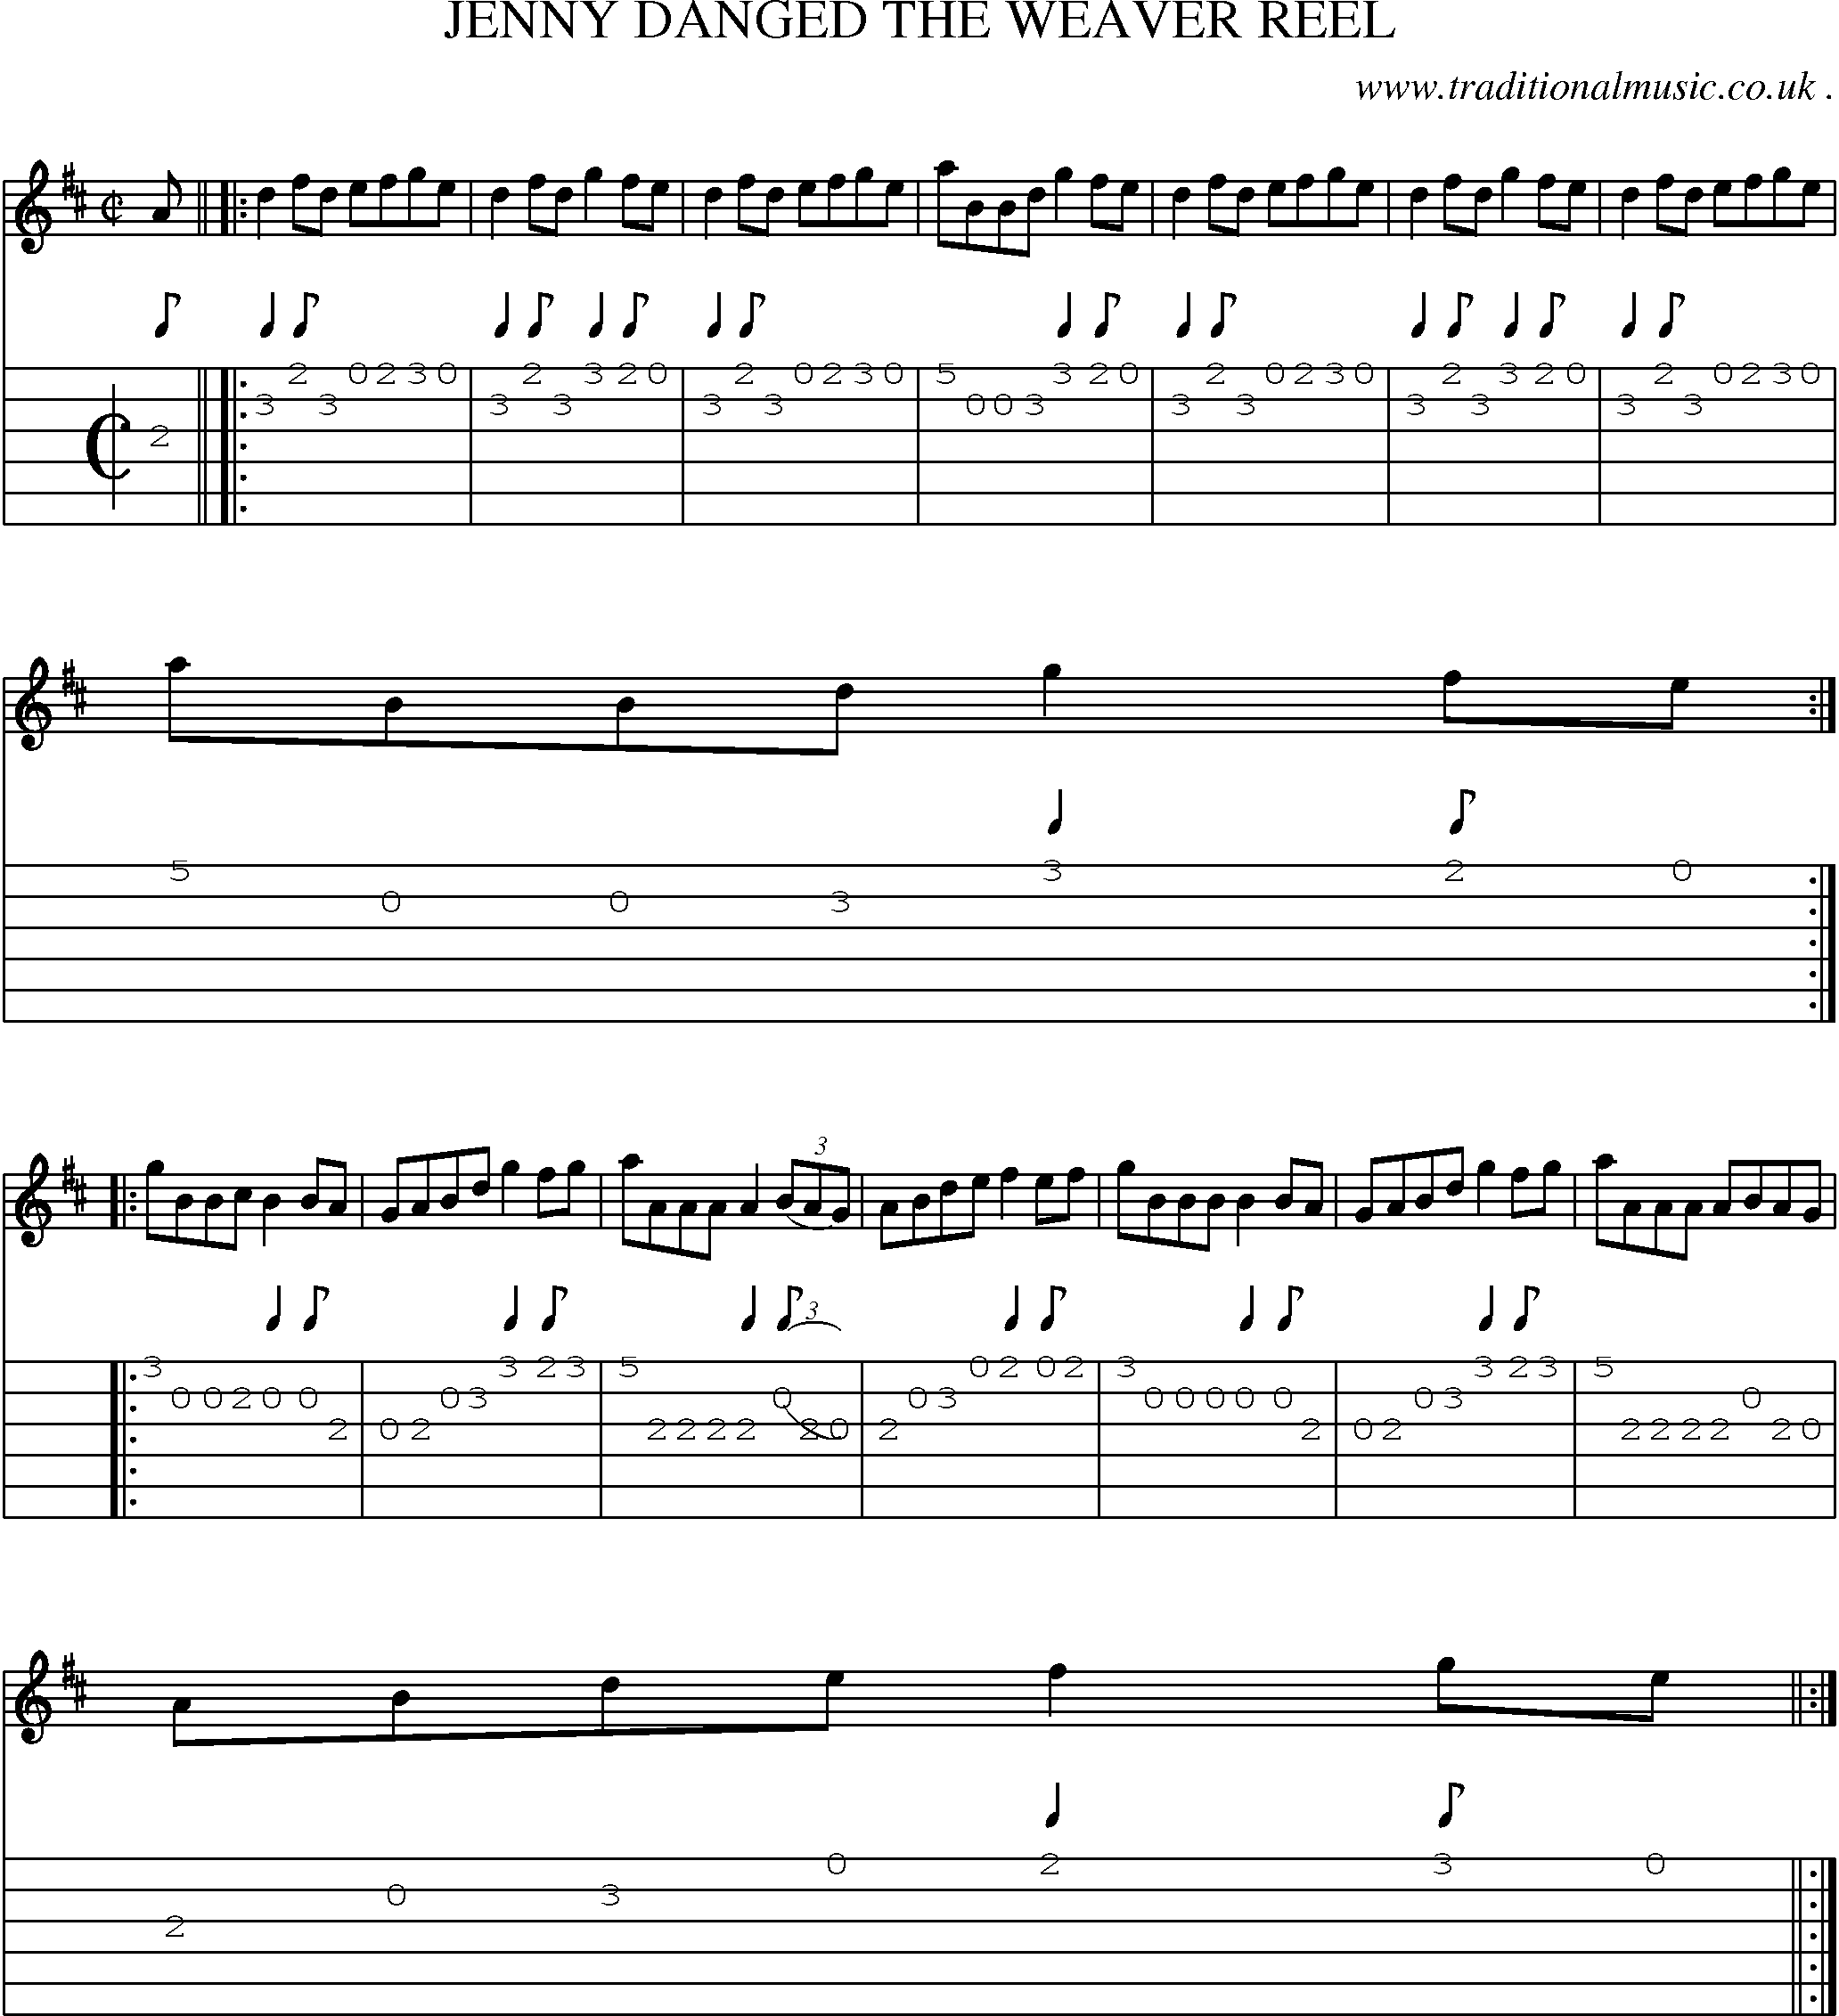 Sheet-Music and Guitar Tabs for Jenny Danged The Weaver Reel